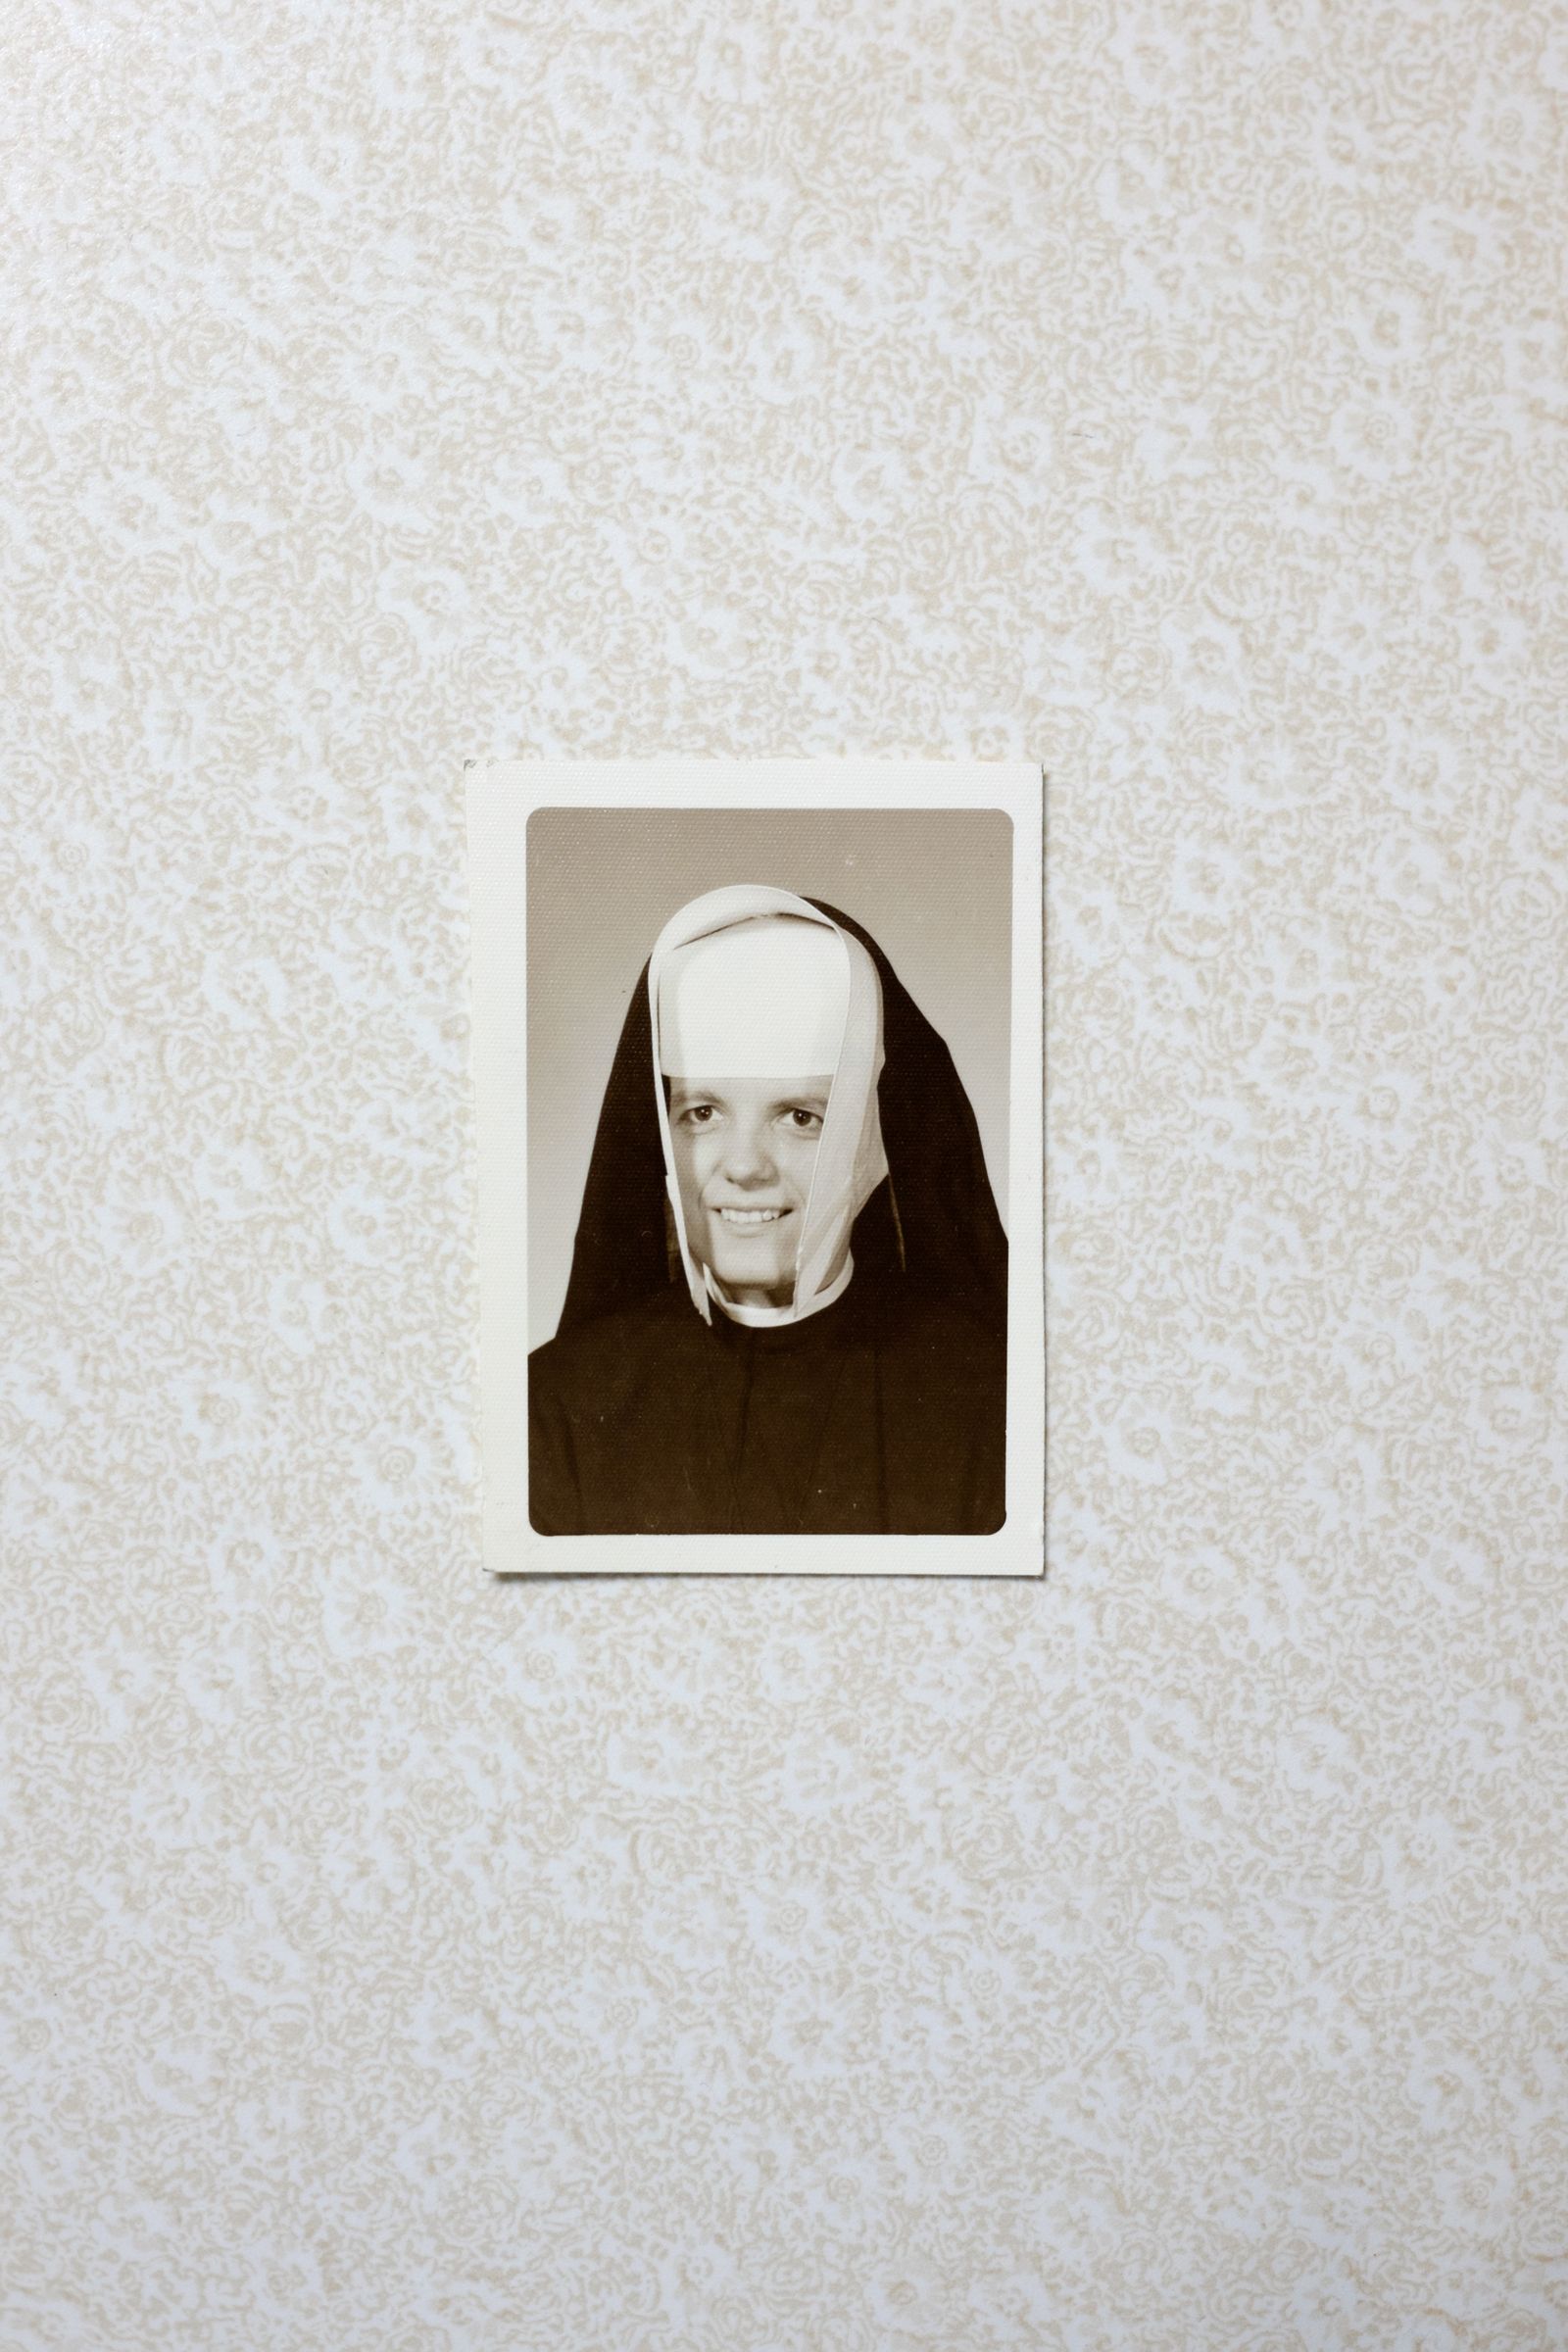 © Giulia Bianchi - Image from the you gave the virgin a new heart photography project